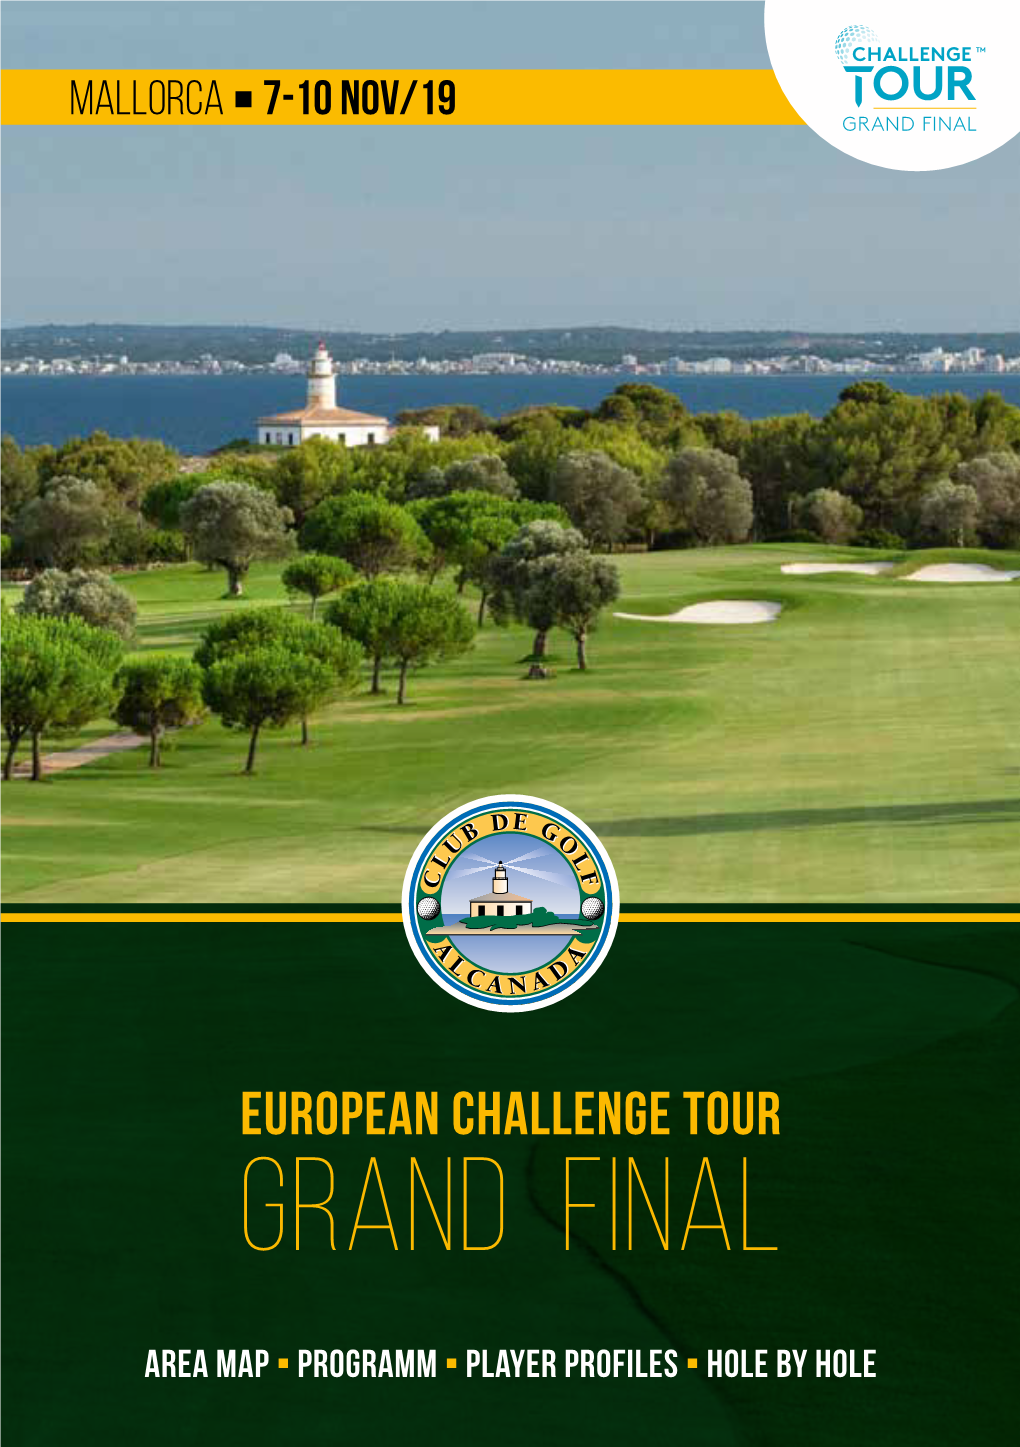 Club De Golf Alcanada, We Also Aim to Make the Most of Our Own Fantastic Opportunity and to Showcase Golf in Mallorca